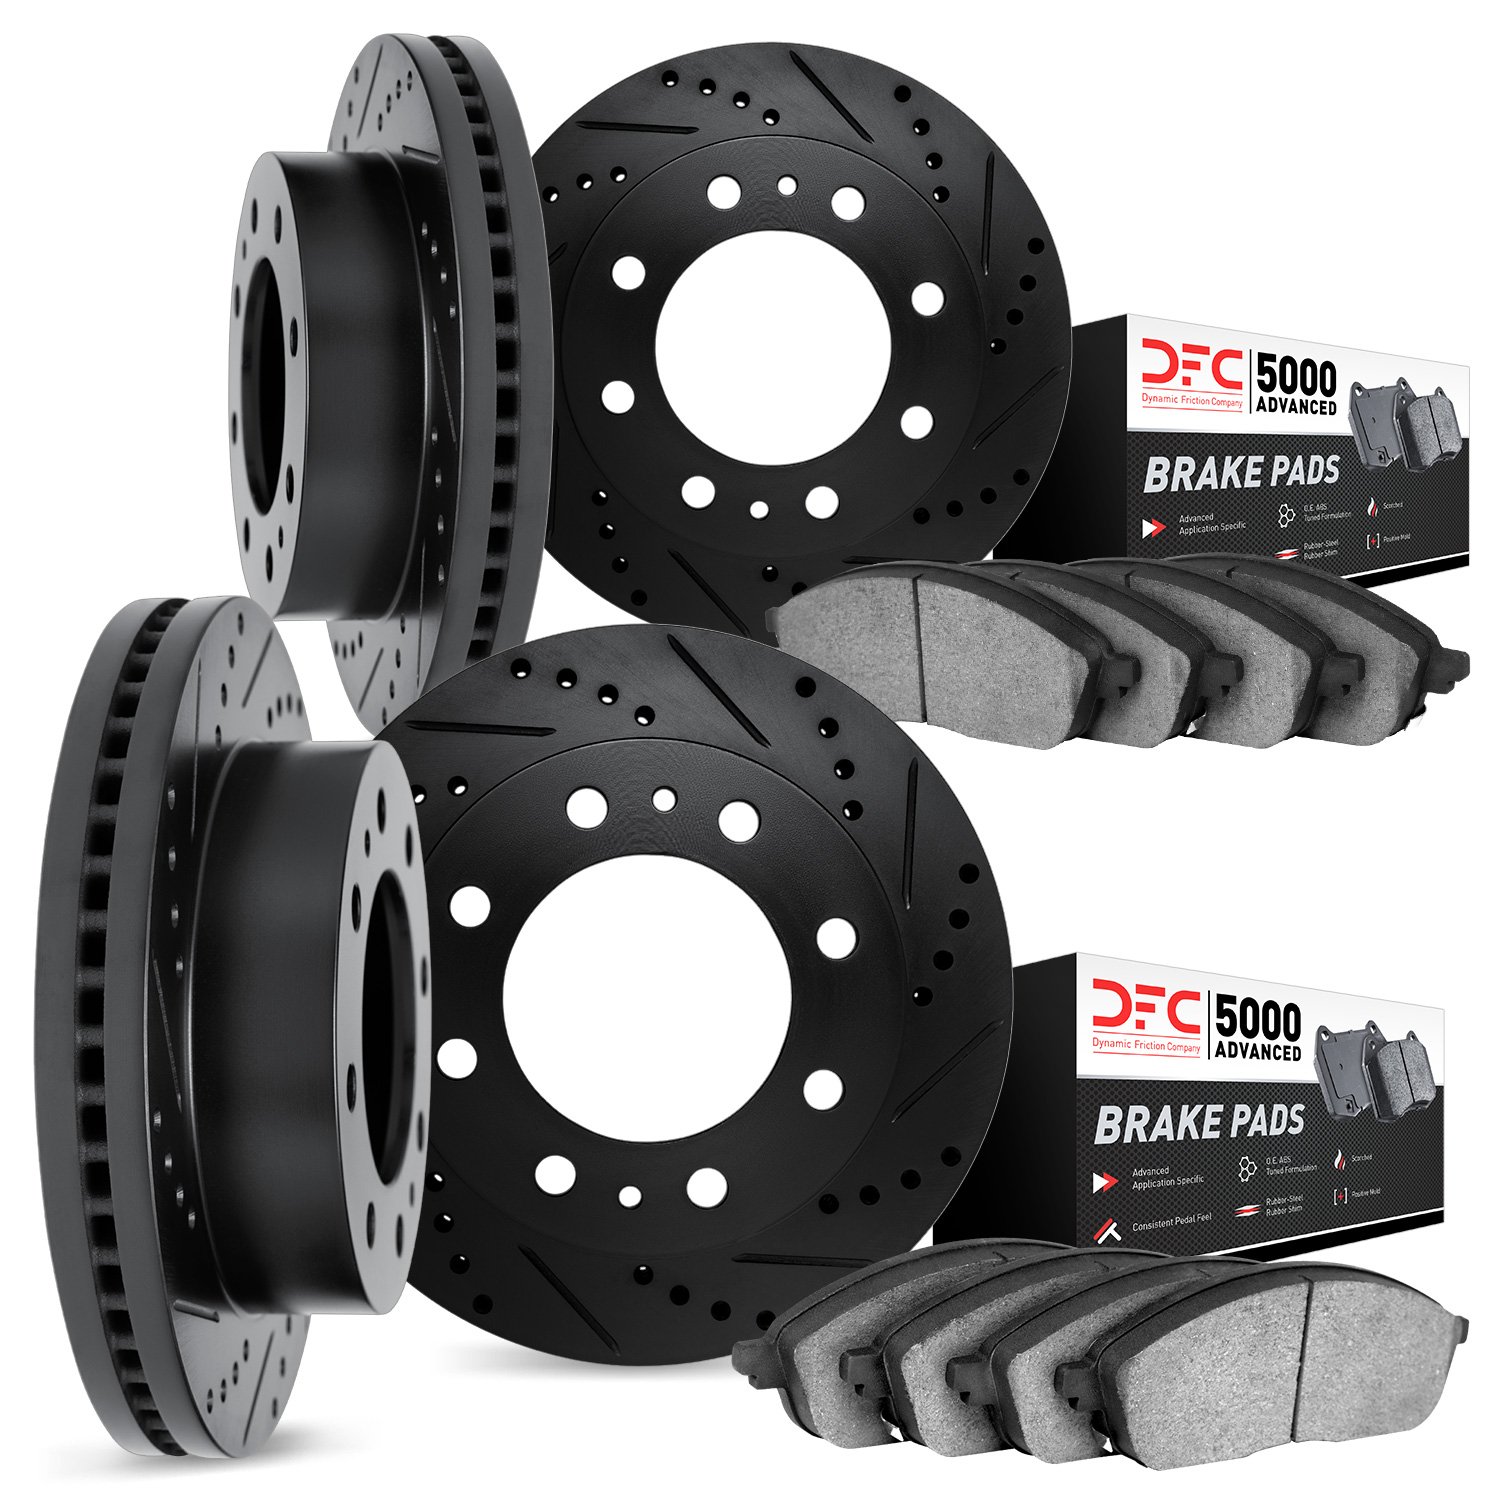 8504-48049 Drilled/Slotted Brake Rotors w/5000 Advanced Brake Pads Kit [Black], Fits Select GM, Position: Front and Rear